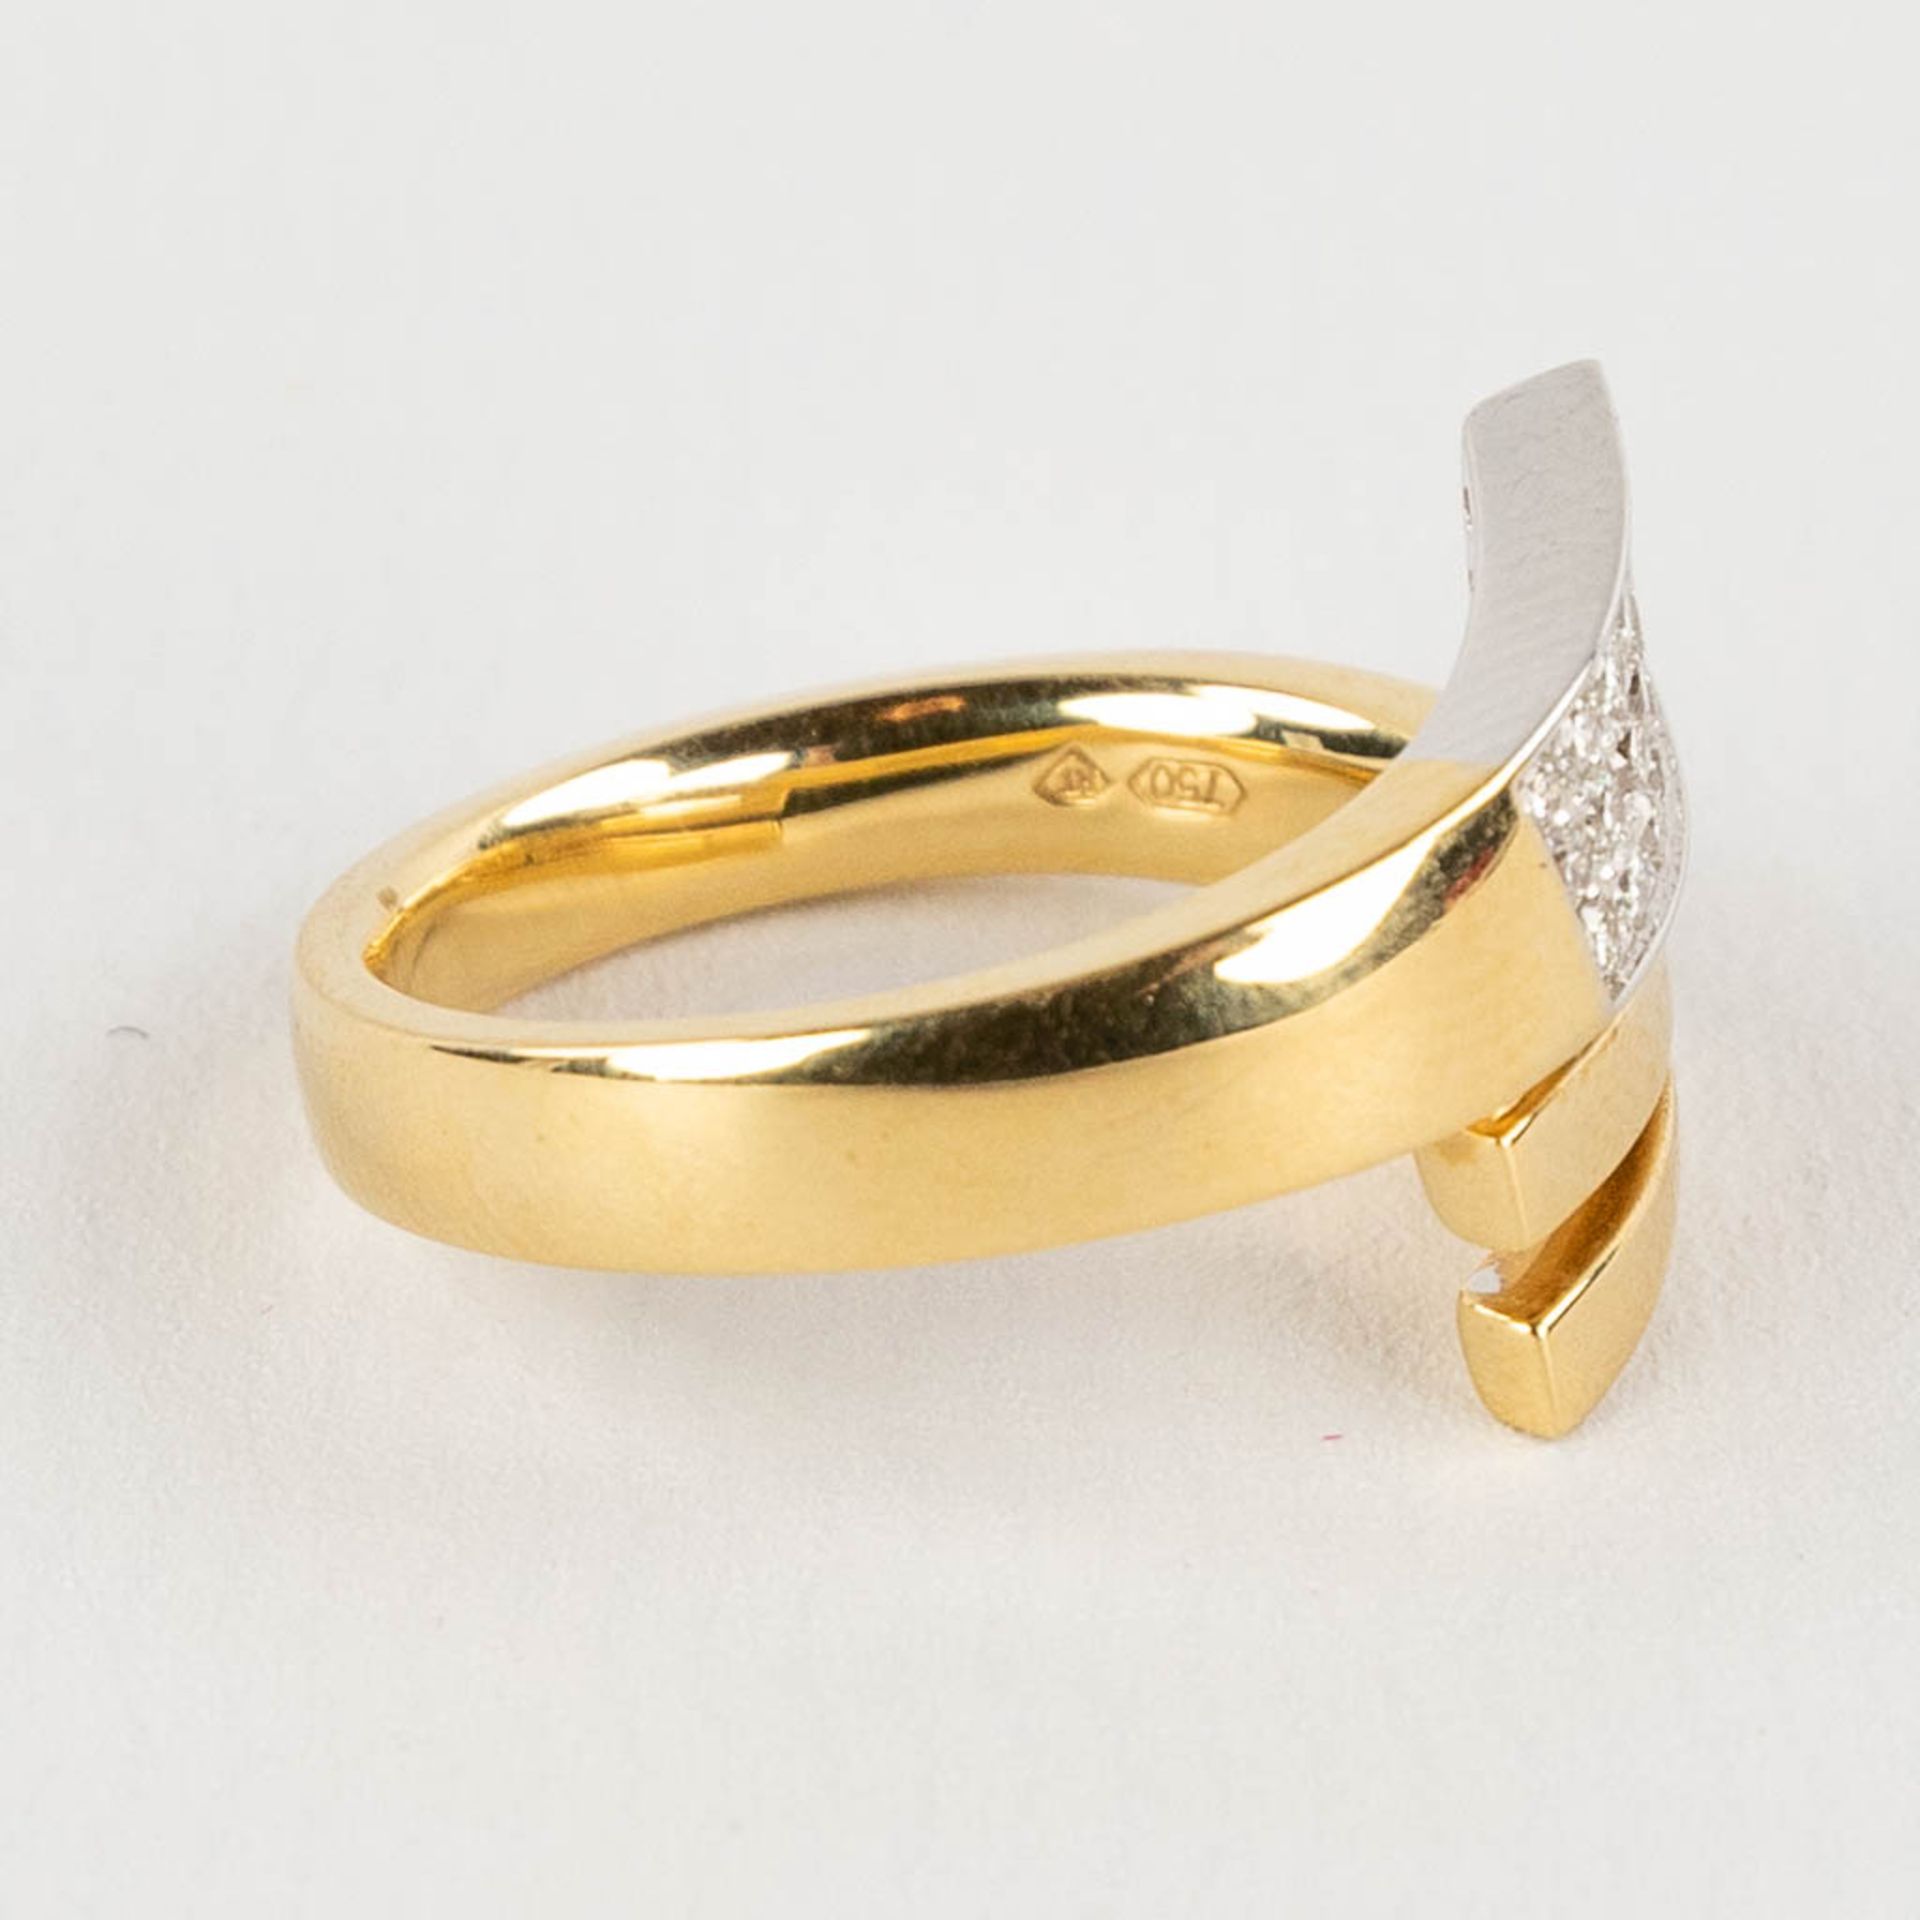 A ring, 18kt yellow gold with diamonds, appr. 0,42ct, ring size 55. - Image 7 of 11